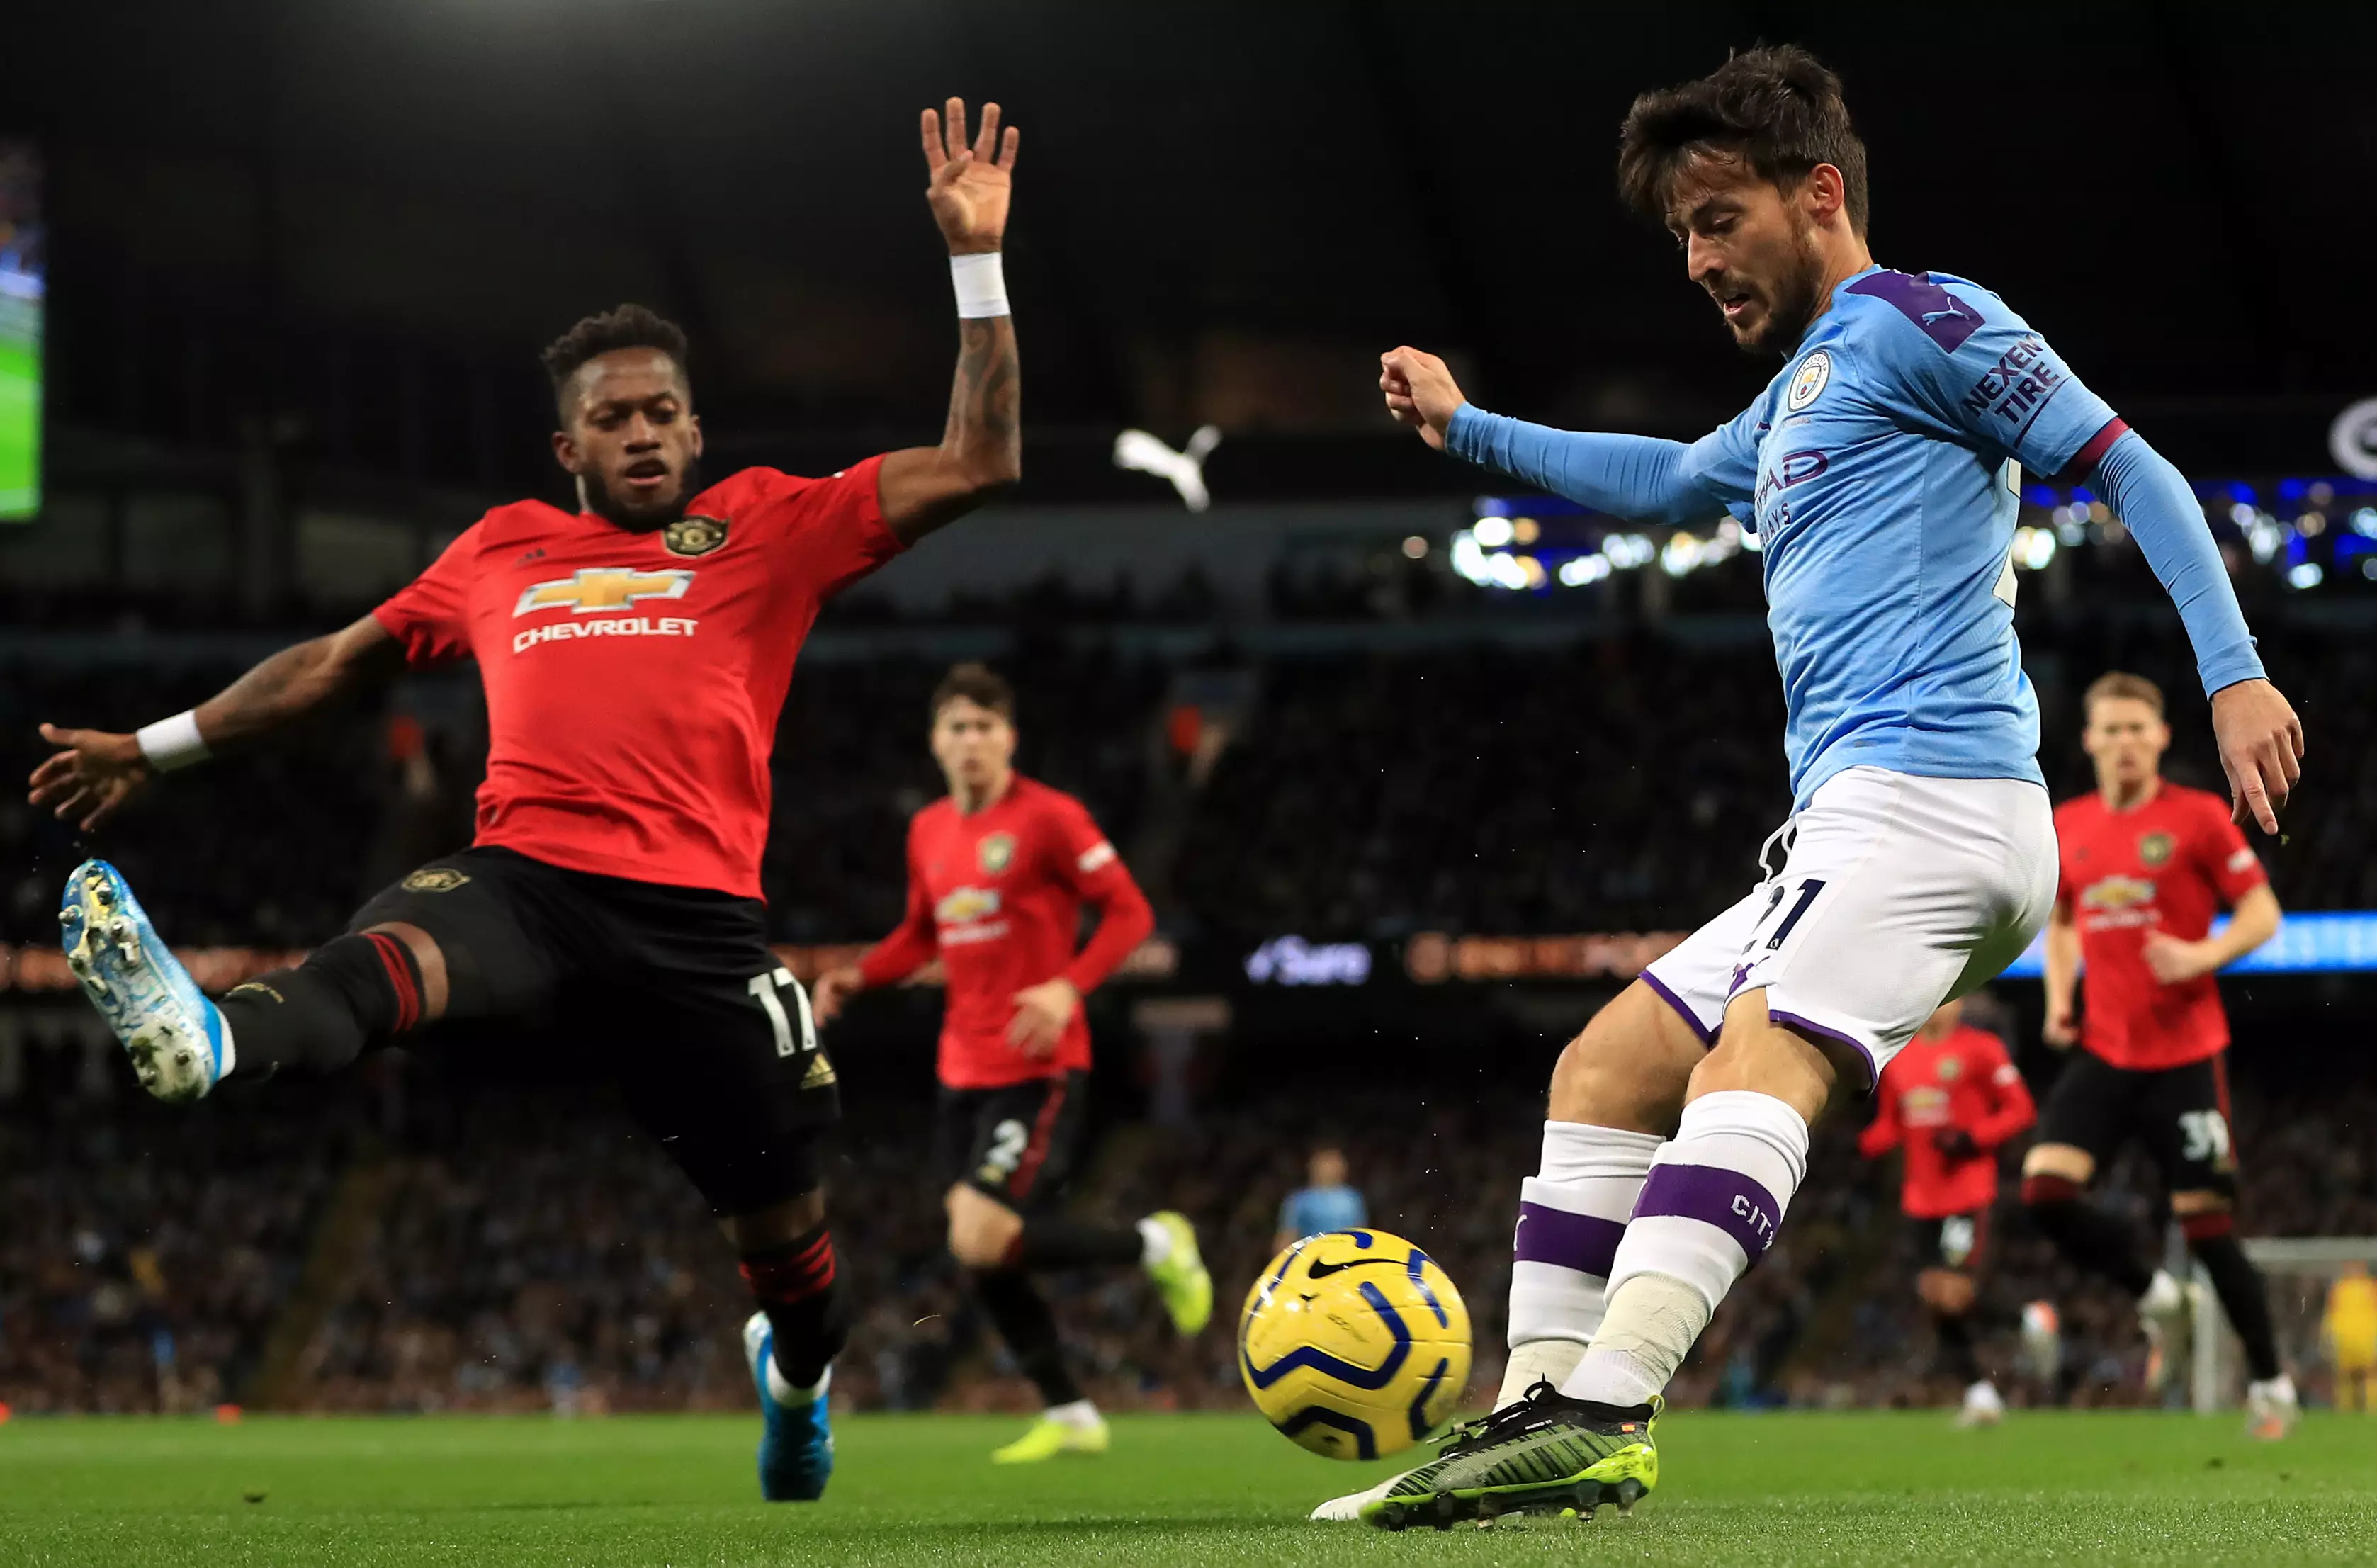 Silva on the ball against Manchester United. Image: PA Images